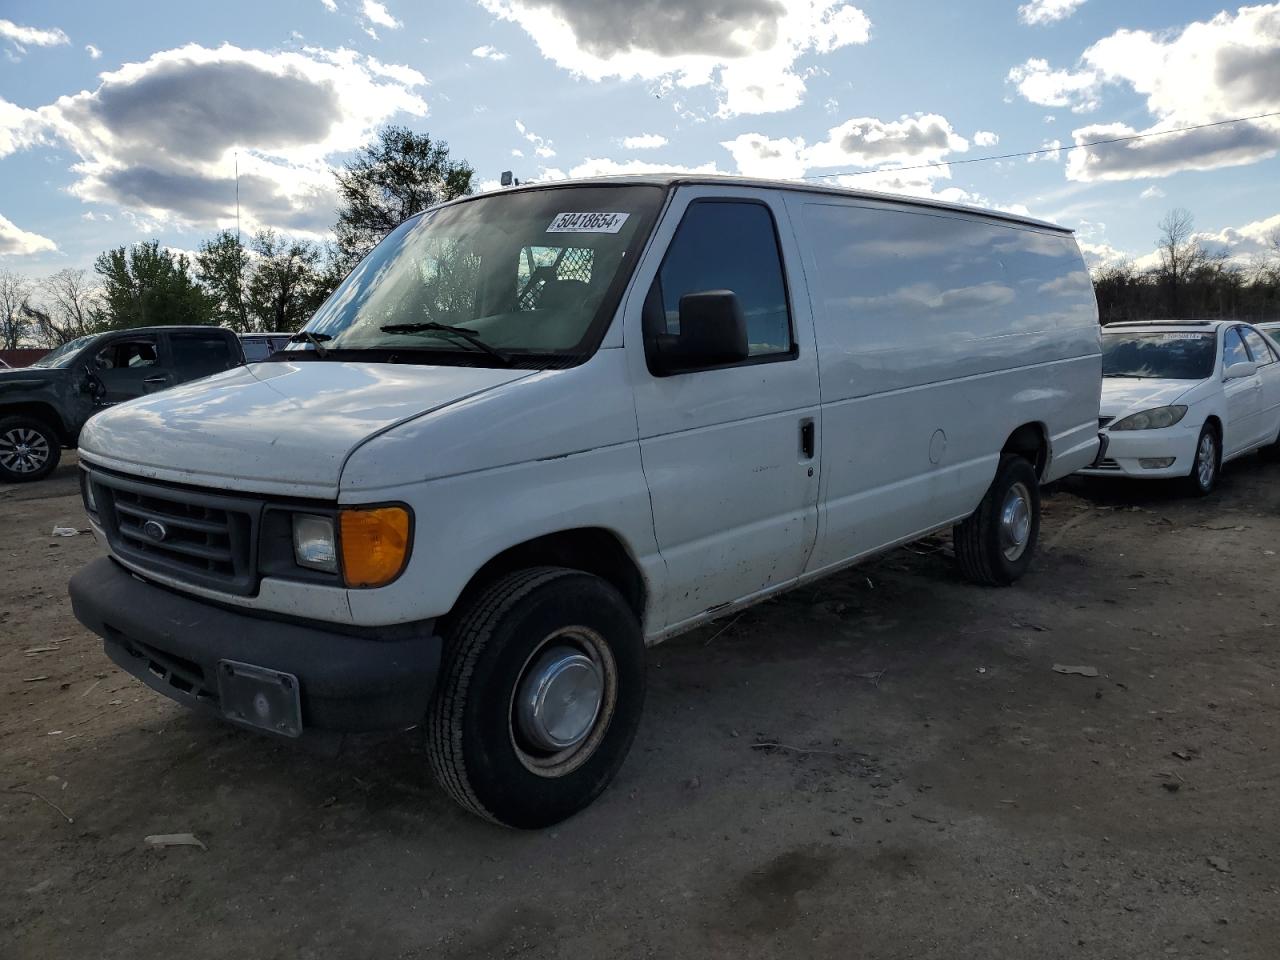 vin: 1FTSS34L14HB47878 1FTSS34L14HB47878 2004 ford econoline 5400 for Sale in 21225, Md - Baltimore East, Baltimore, Maryland, USA